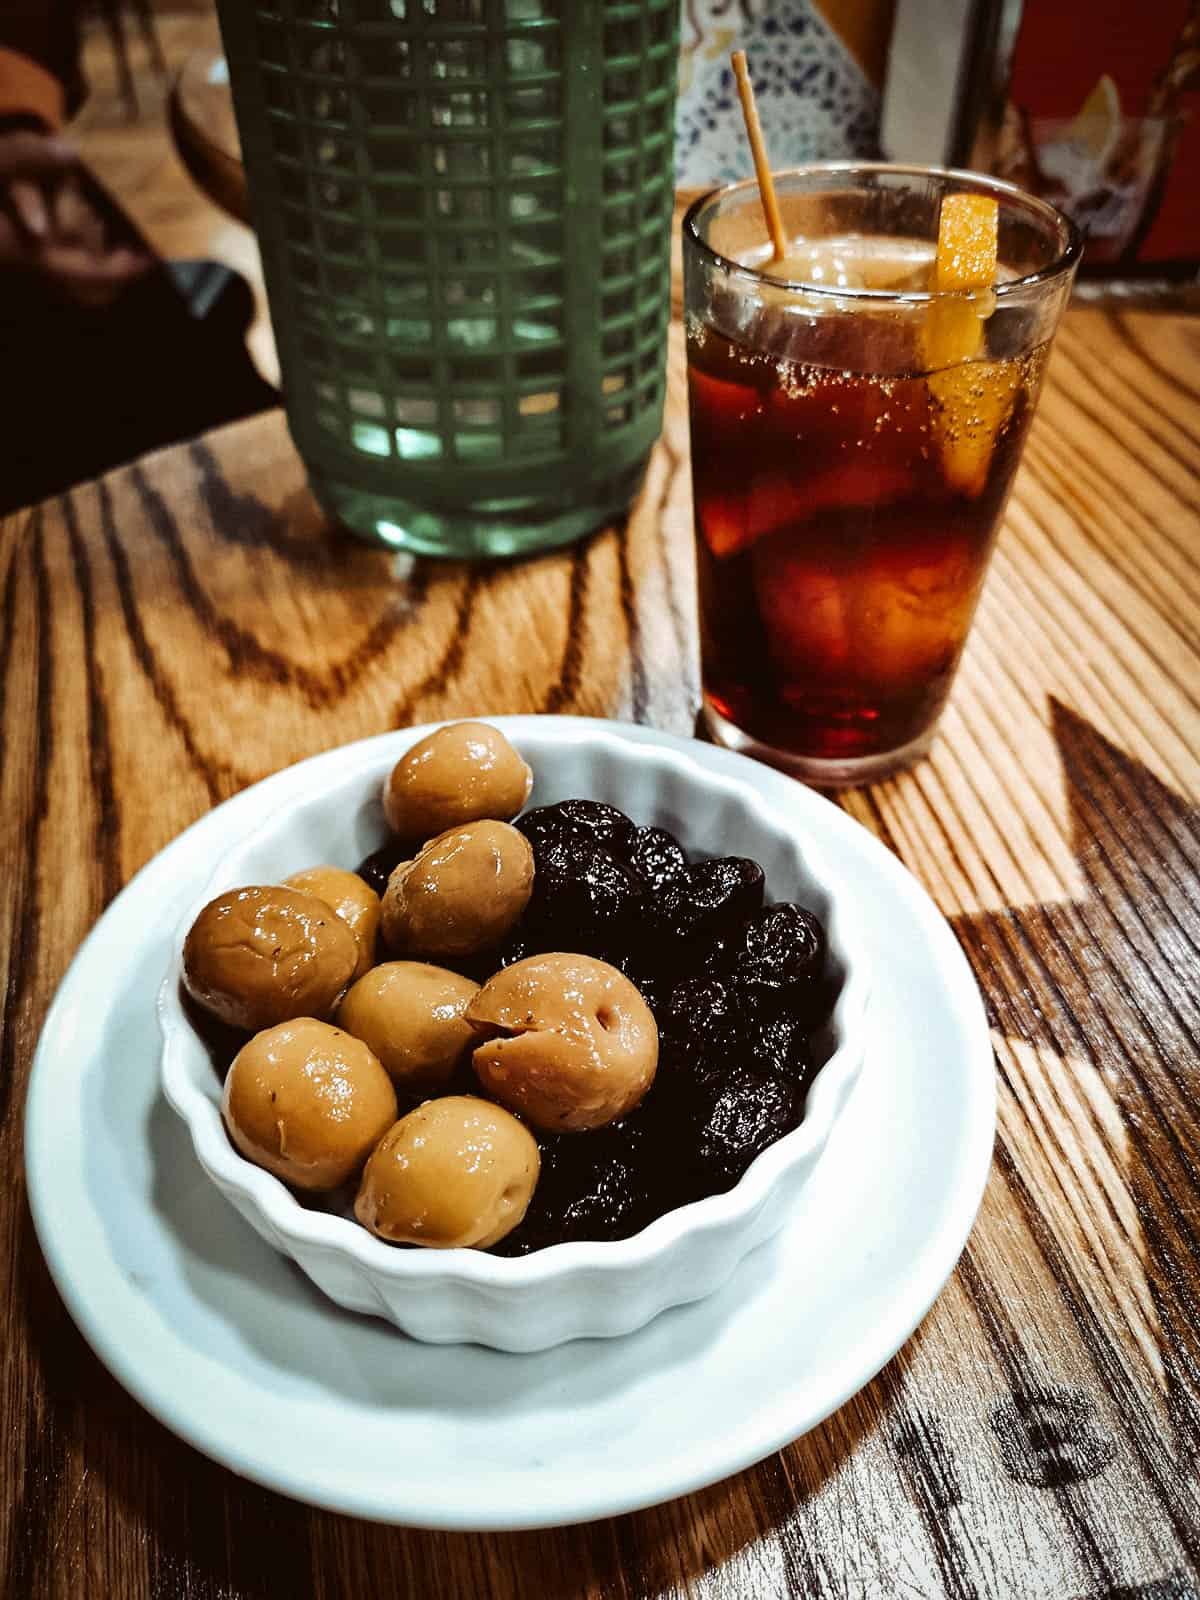 Aceitunas, one of the most common traditional Spanish dishes